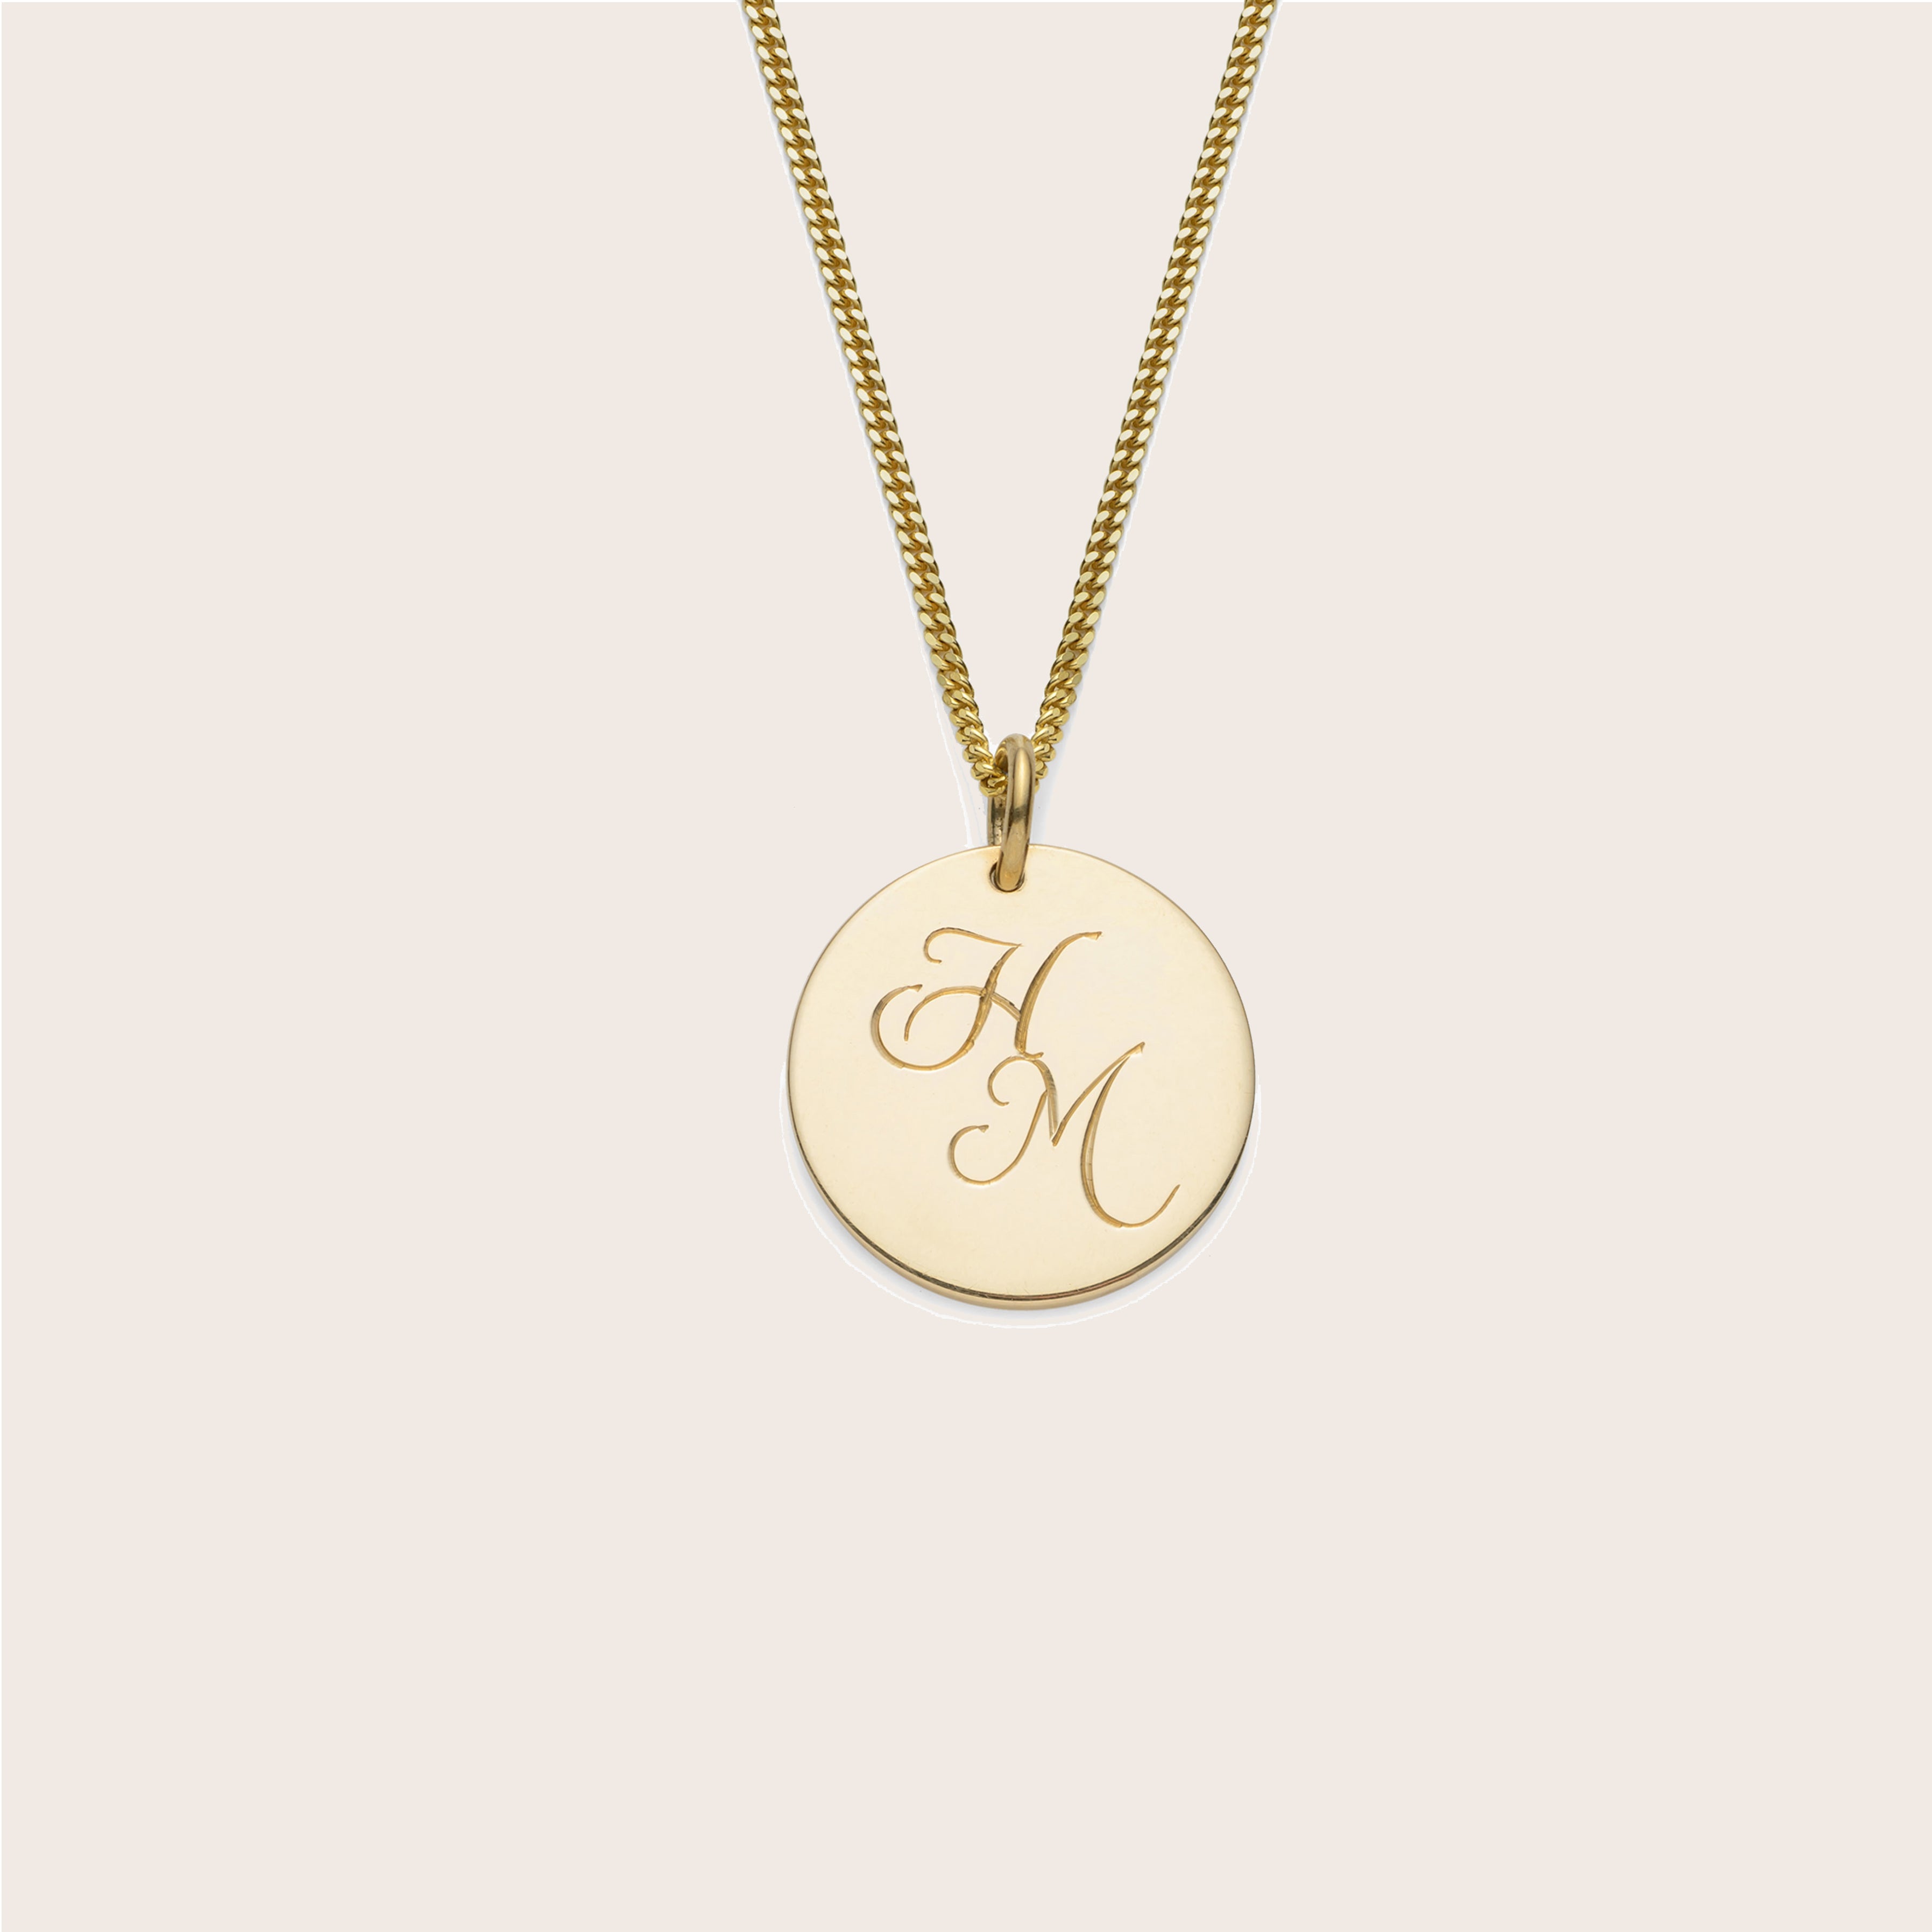 Entwined Initials 9ct gold Disc Necklace - harryrockslondon